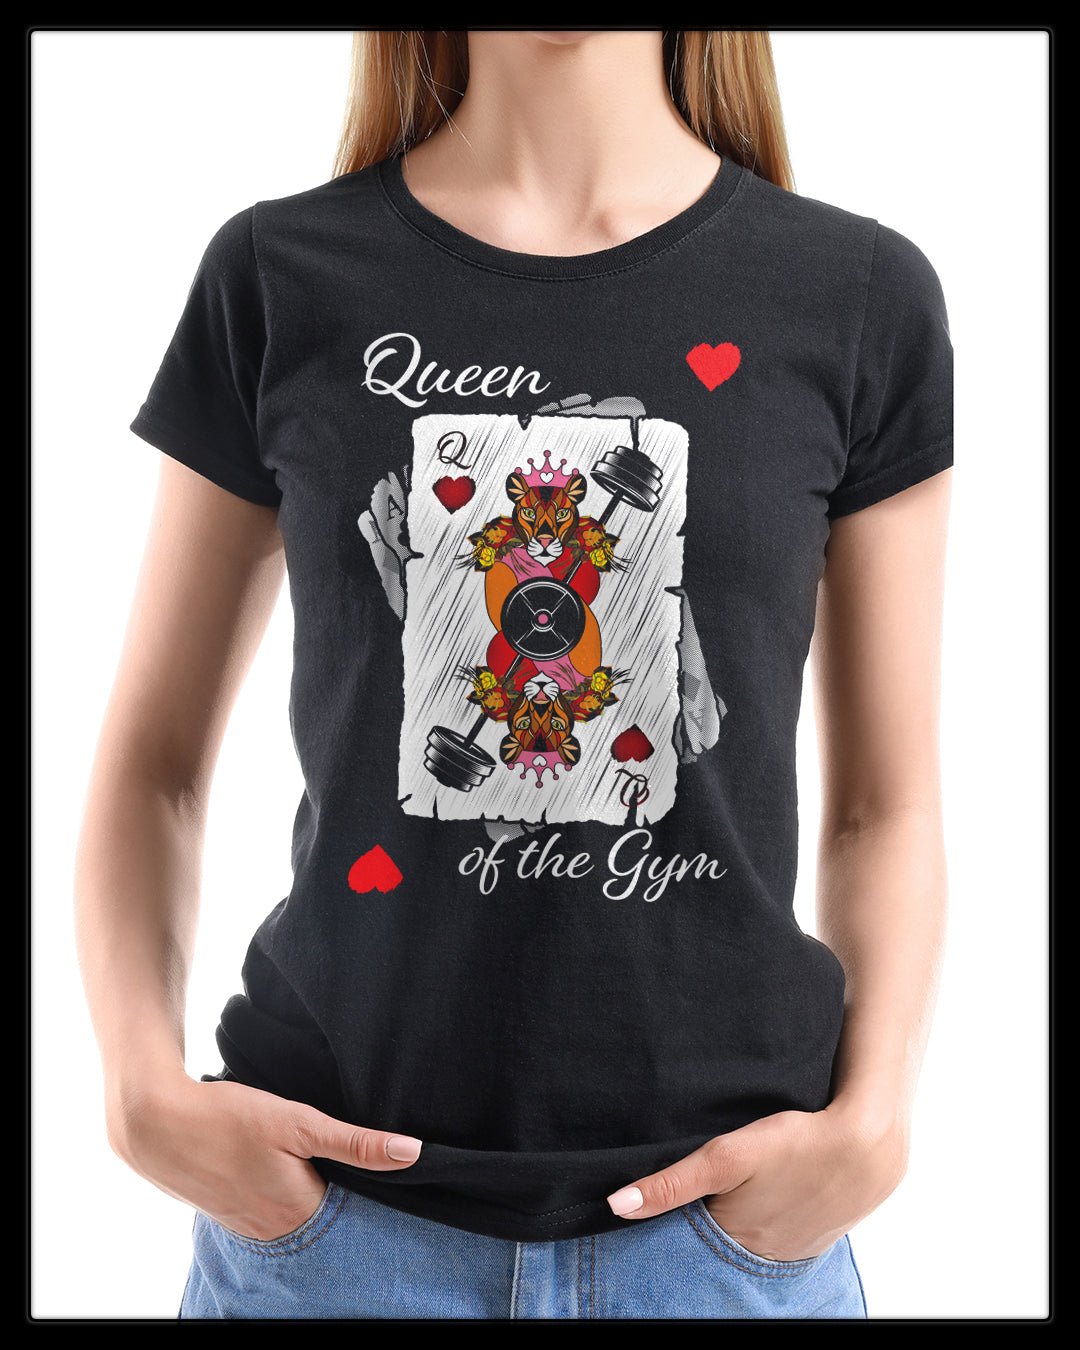 Queen of the Gym on Black Unisex Tee - Cleekers